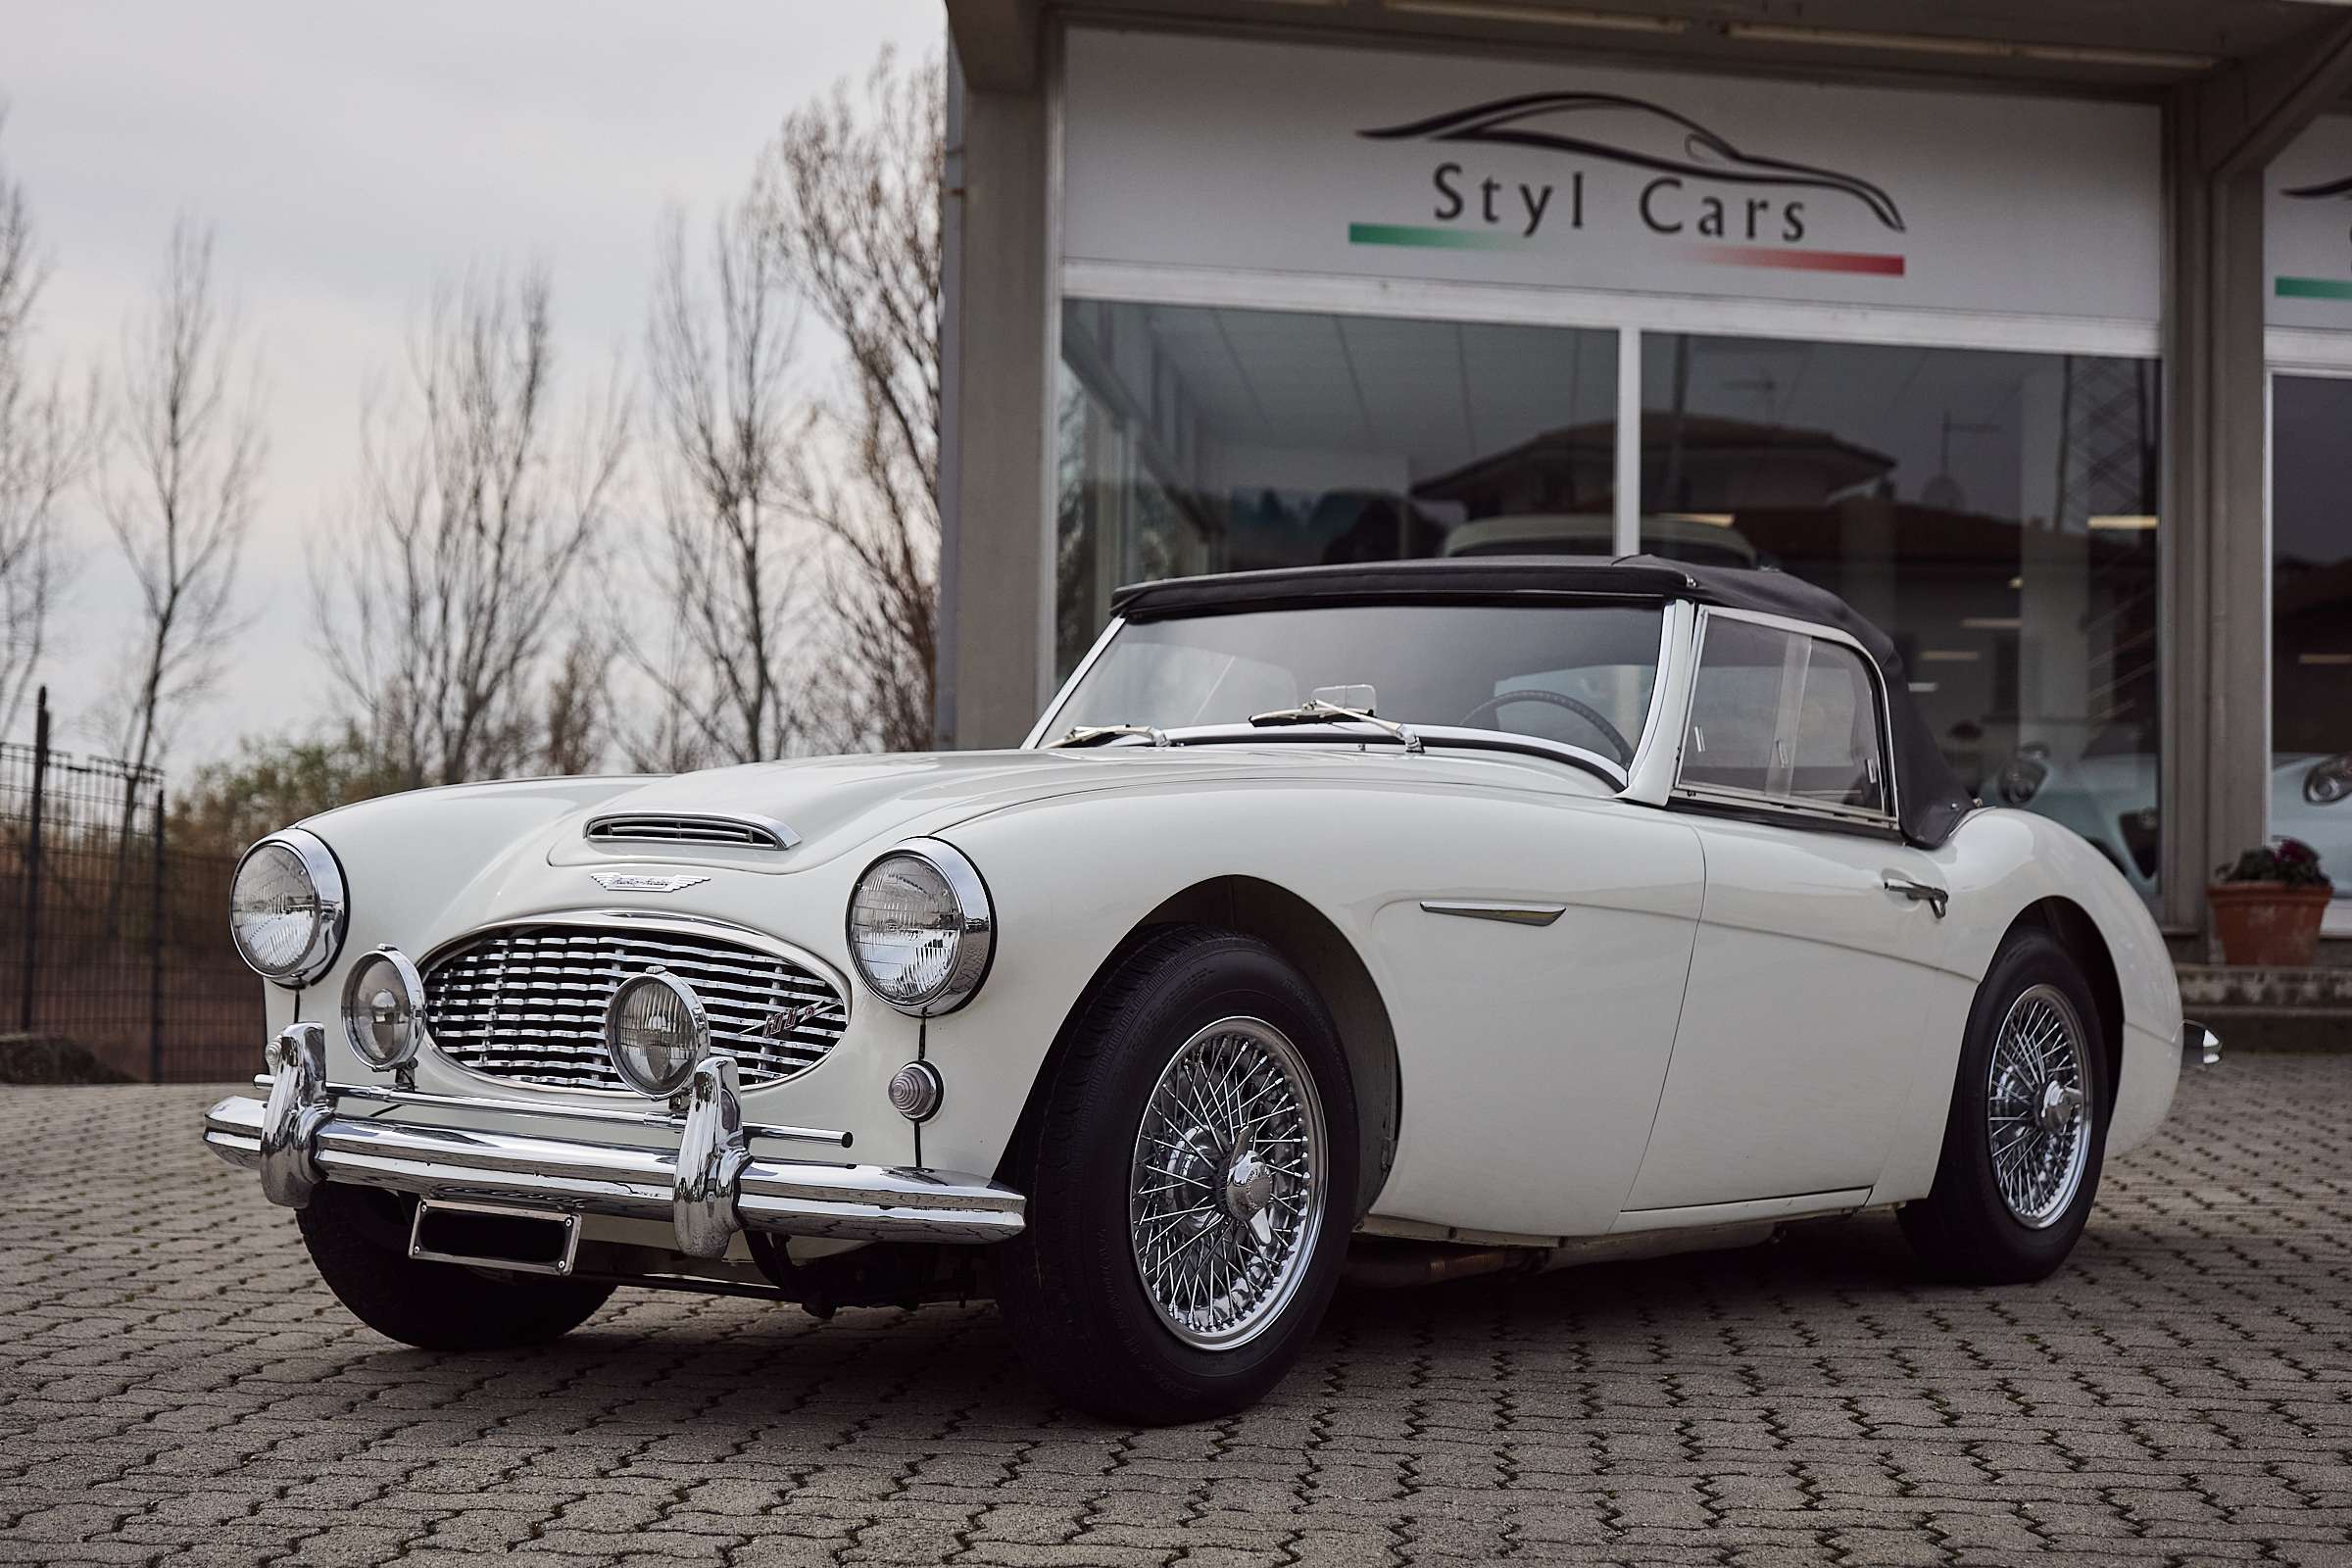 Austin-Healey 100 Convertible in White used in Vinci - Firenze for € 75,000.-